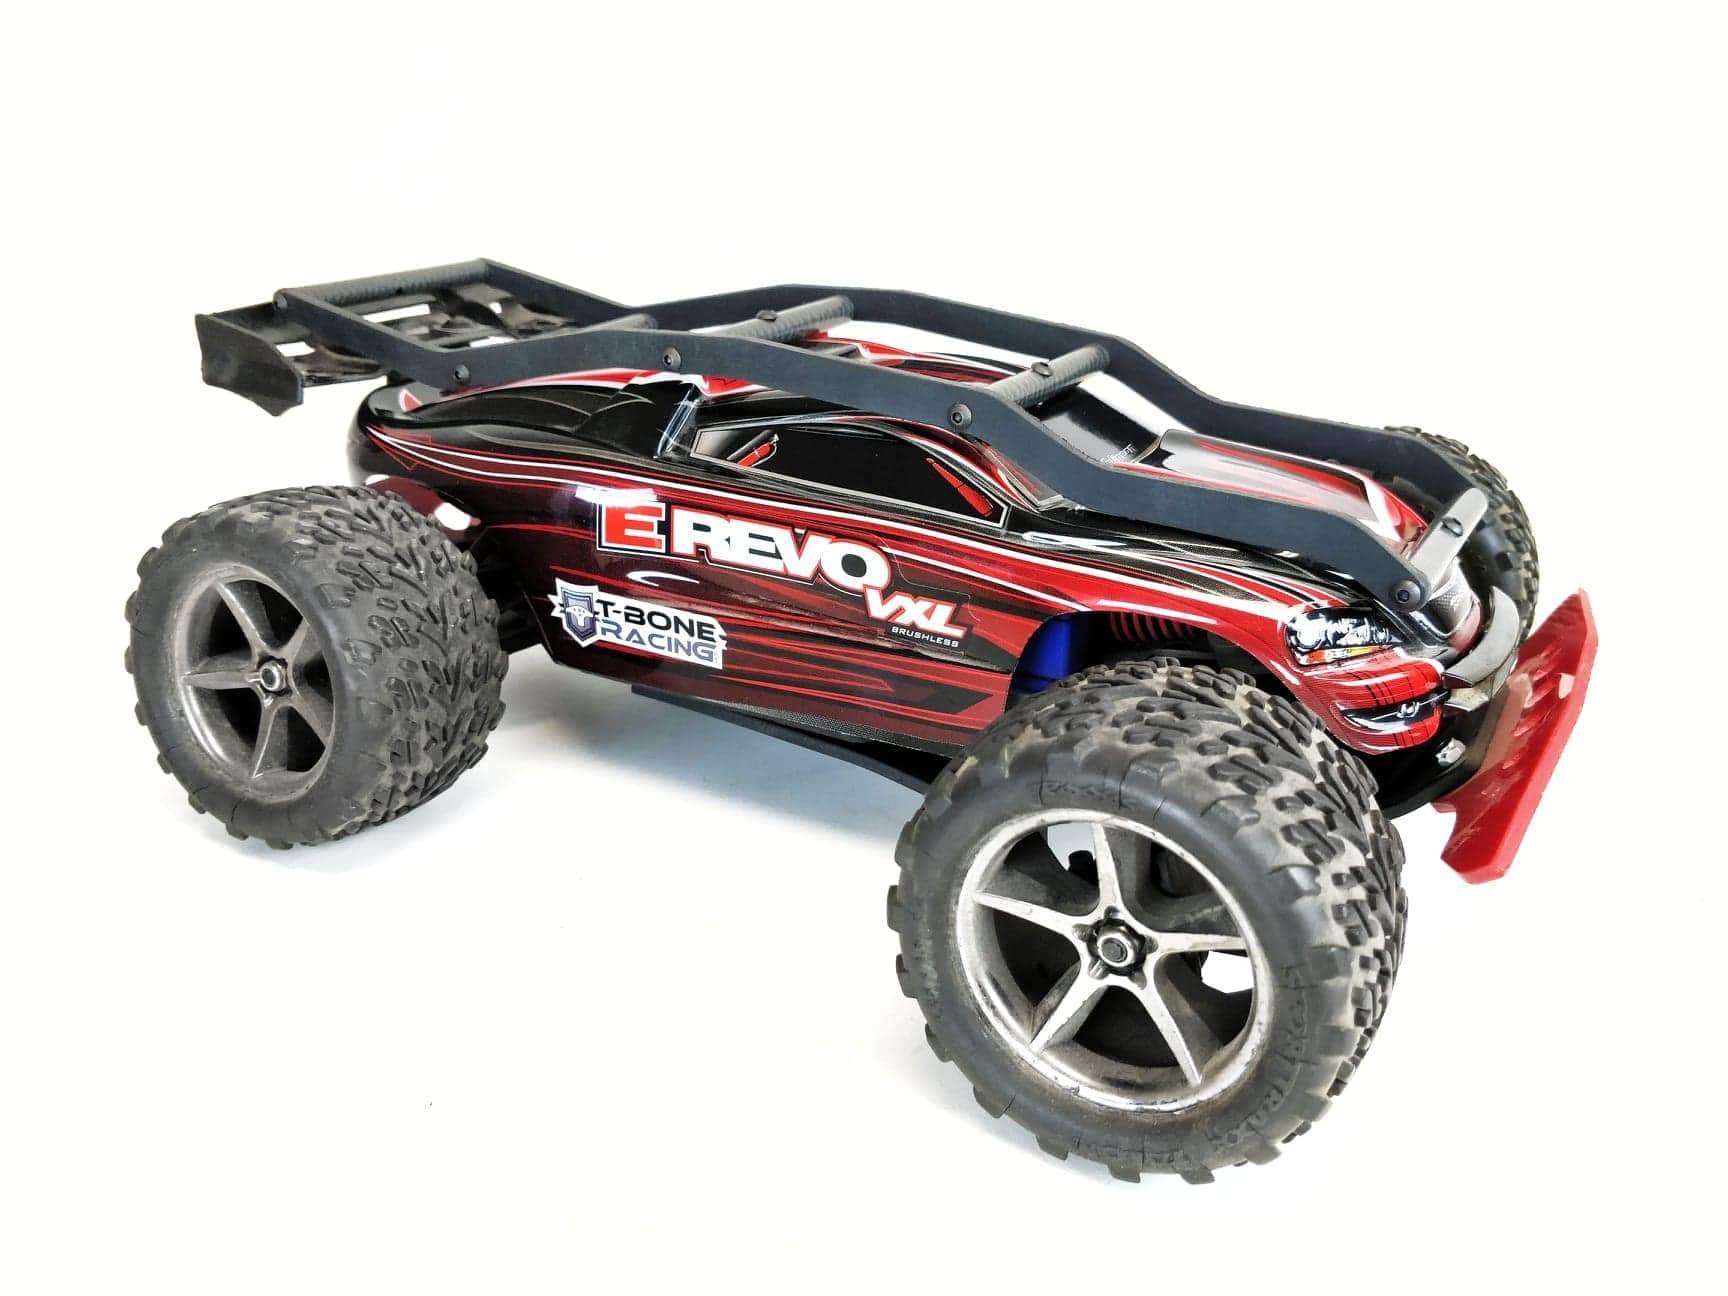 Traxxas 1 16 E Revo Chassis Brace From T Bone Racing Covered By Tbr S And Has An Optional Wheelie Bar